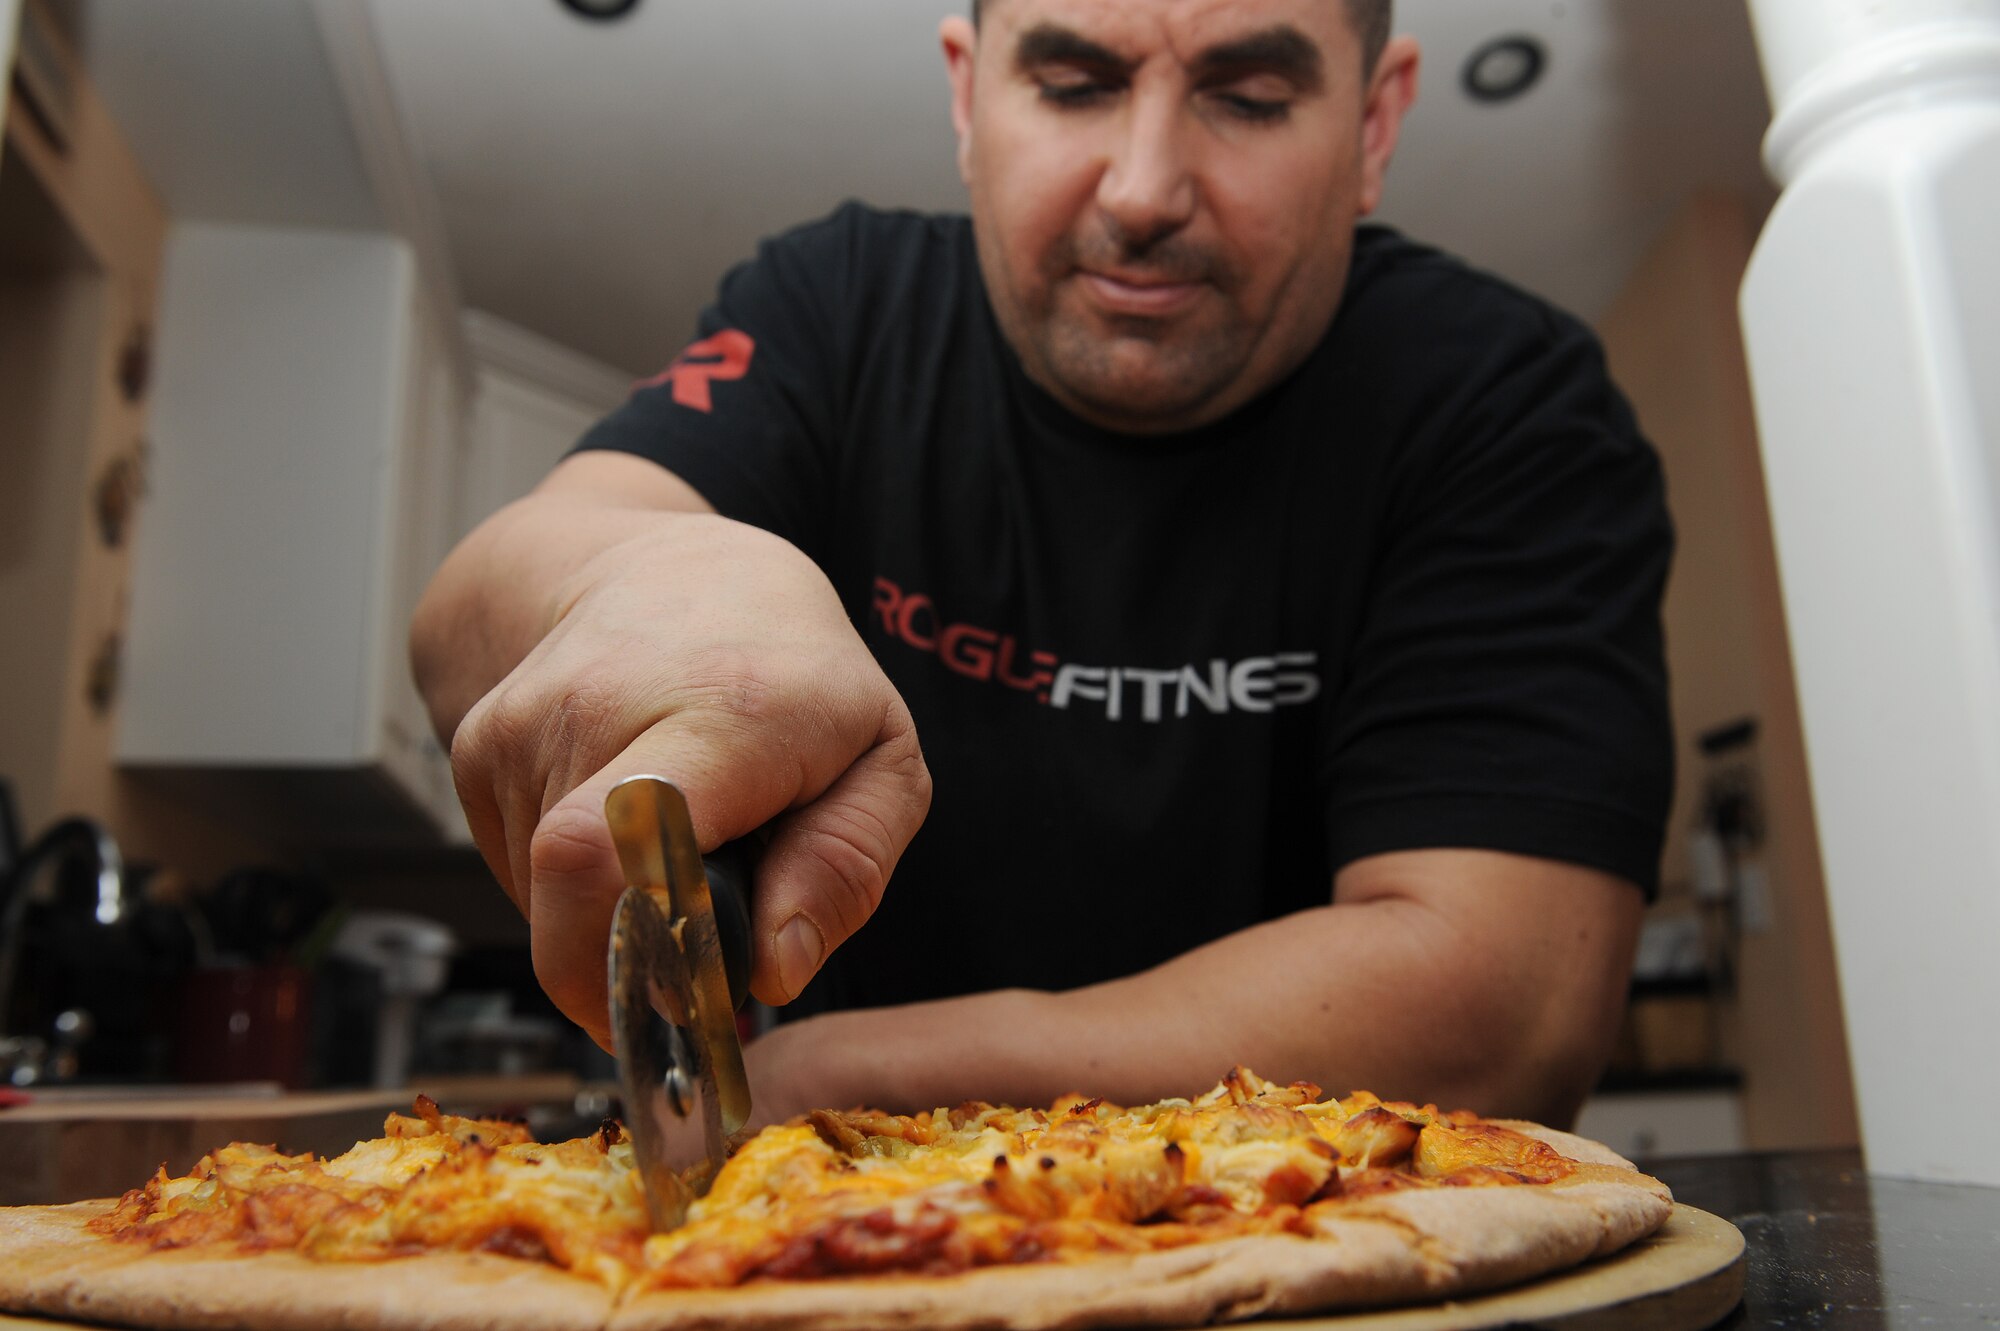 Master Sgt. Scott Stuehrenberg slices his homemade, wheat pizza.  Stuehrenberg uses a wheat-based flower so the pizza will be healthier and have fewer calories.  Stuehrenberg is a 618th Air and Space Operations global operations manager.  (U.S. Air Force photo by Staff Sgt. Maria Bowman)